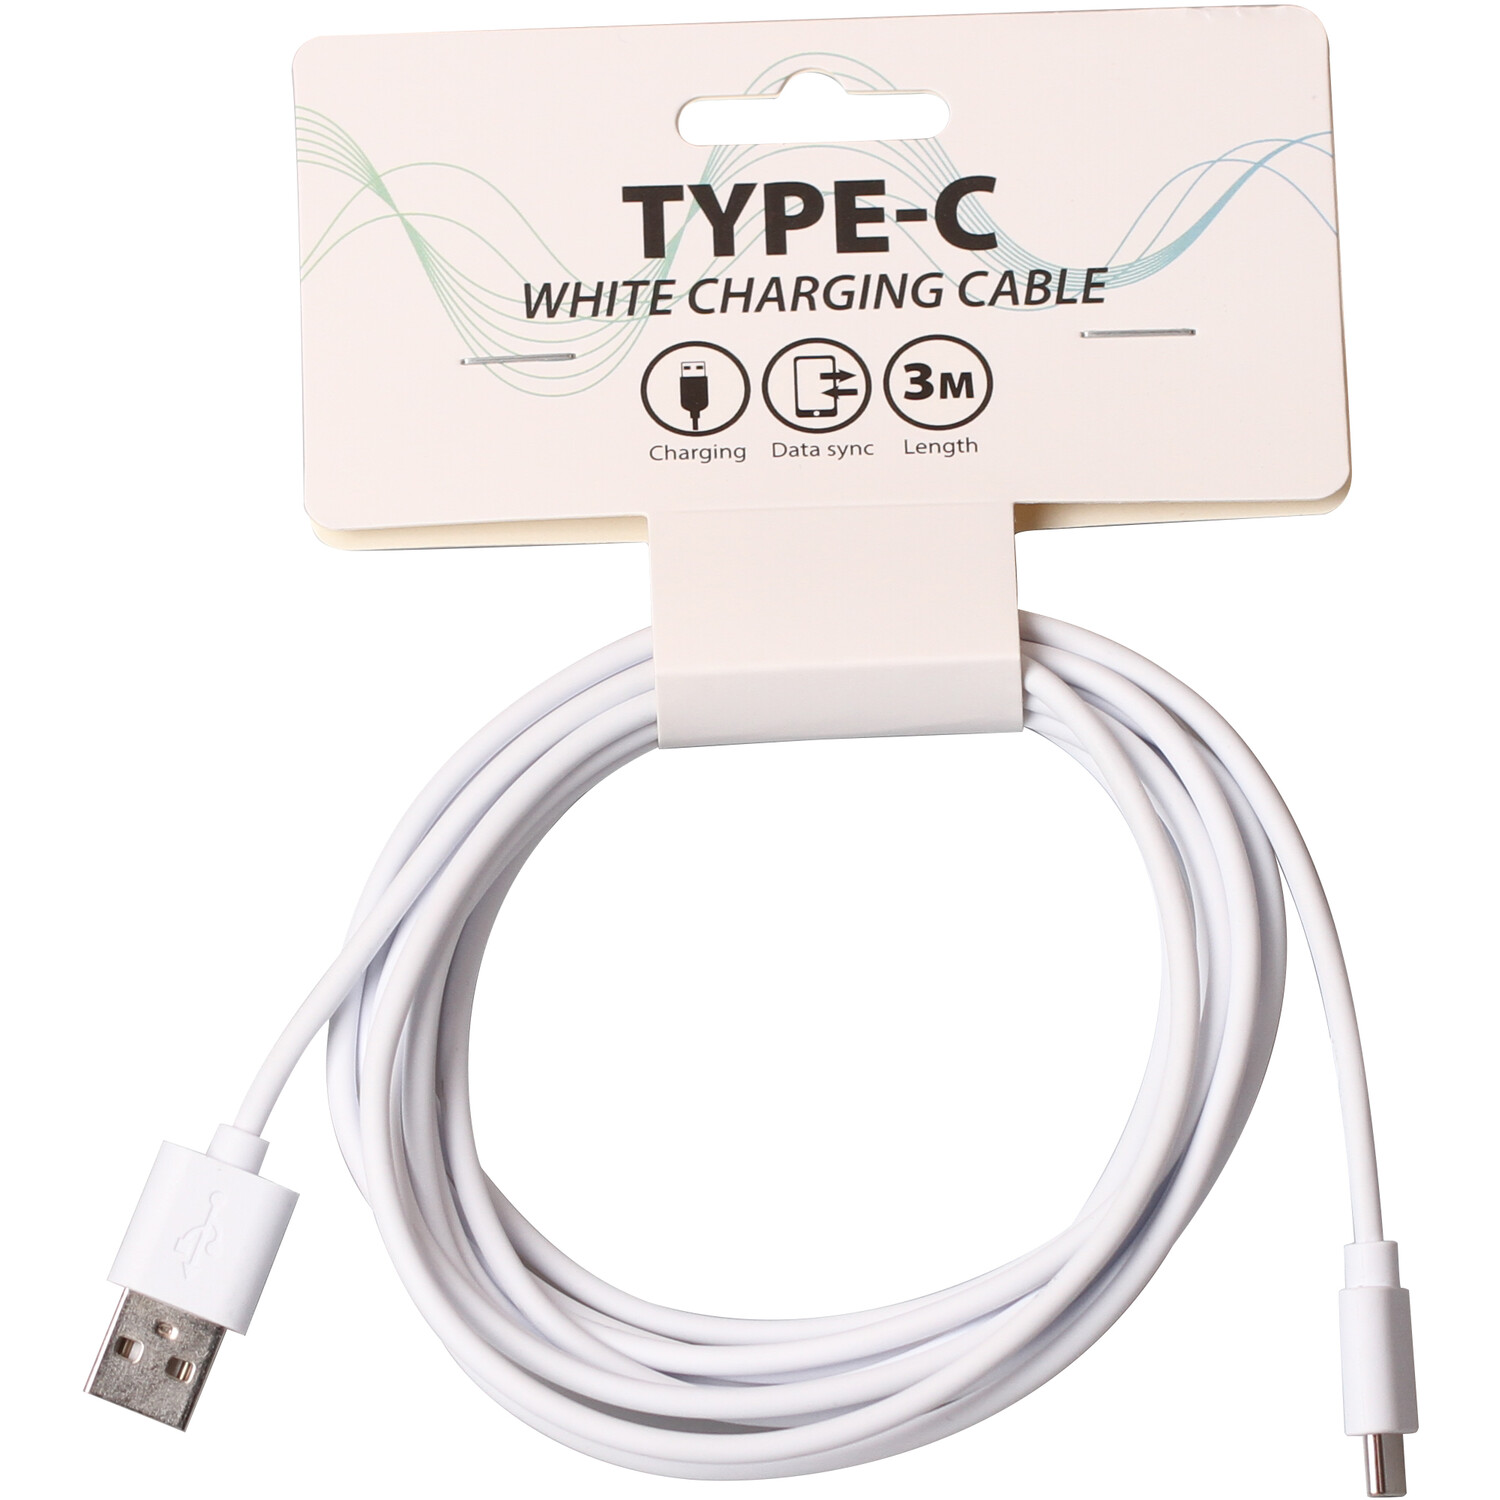 Type-C White Charging Cable Image